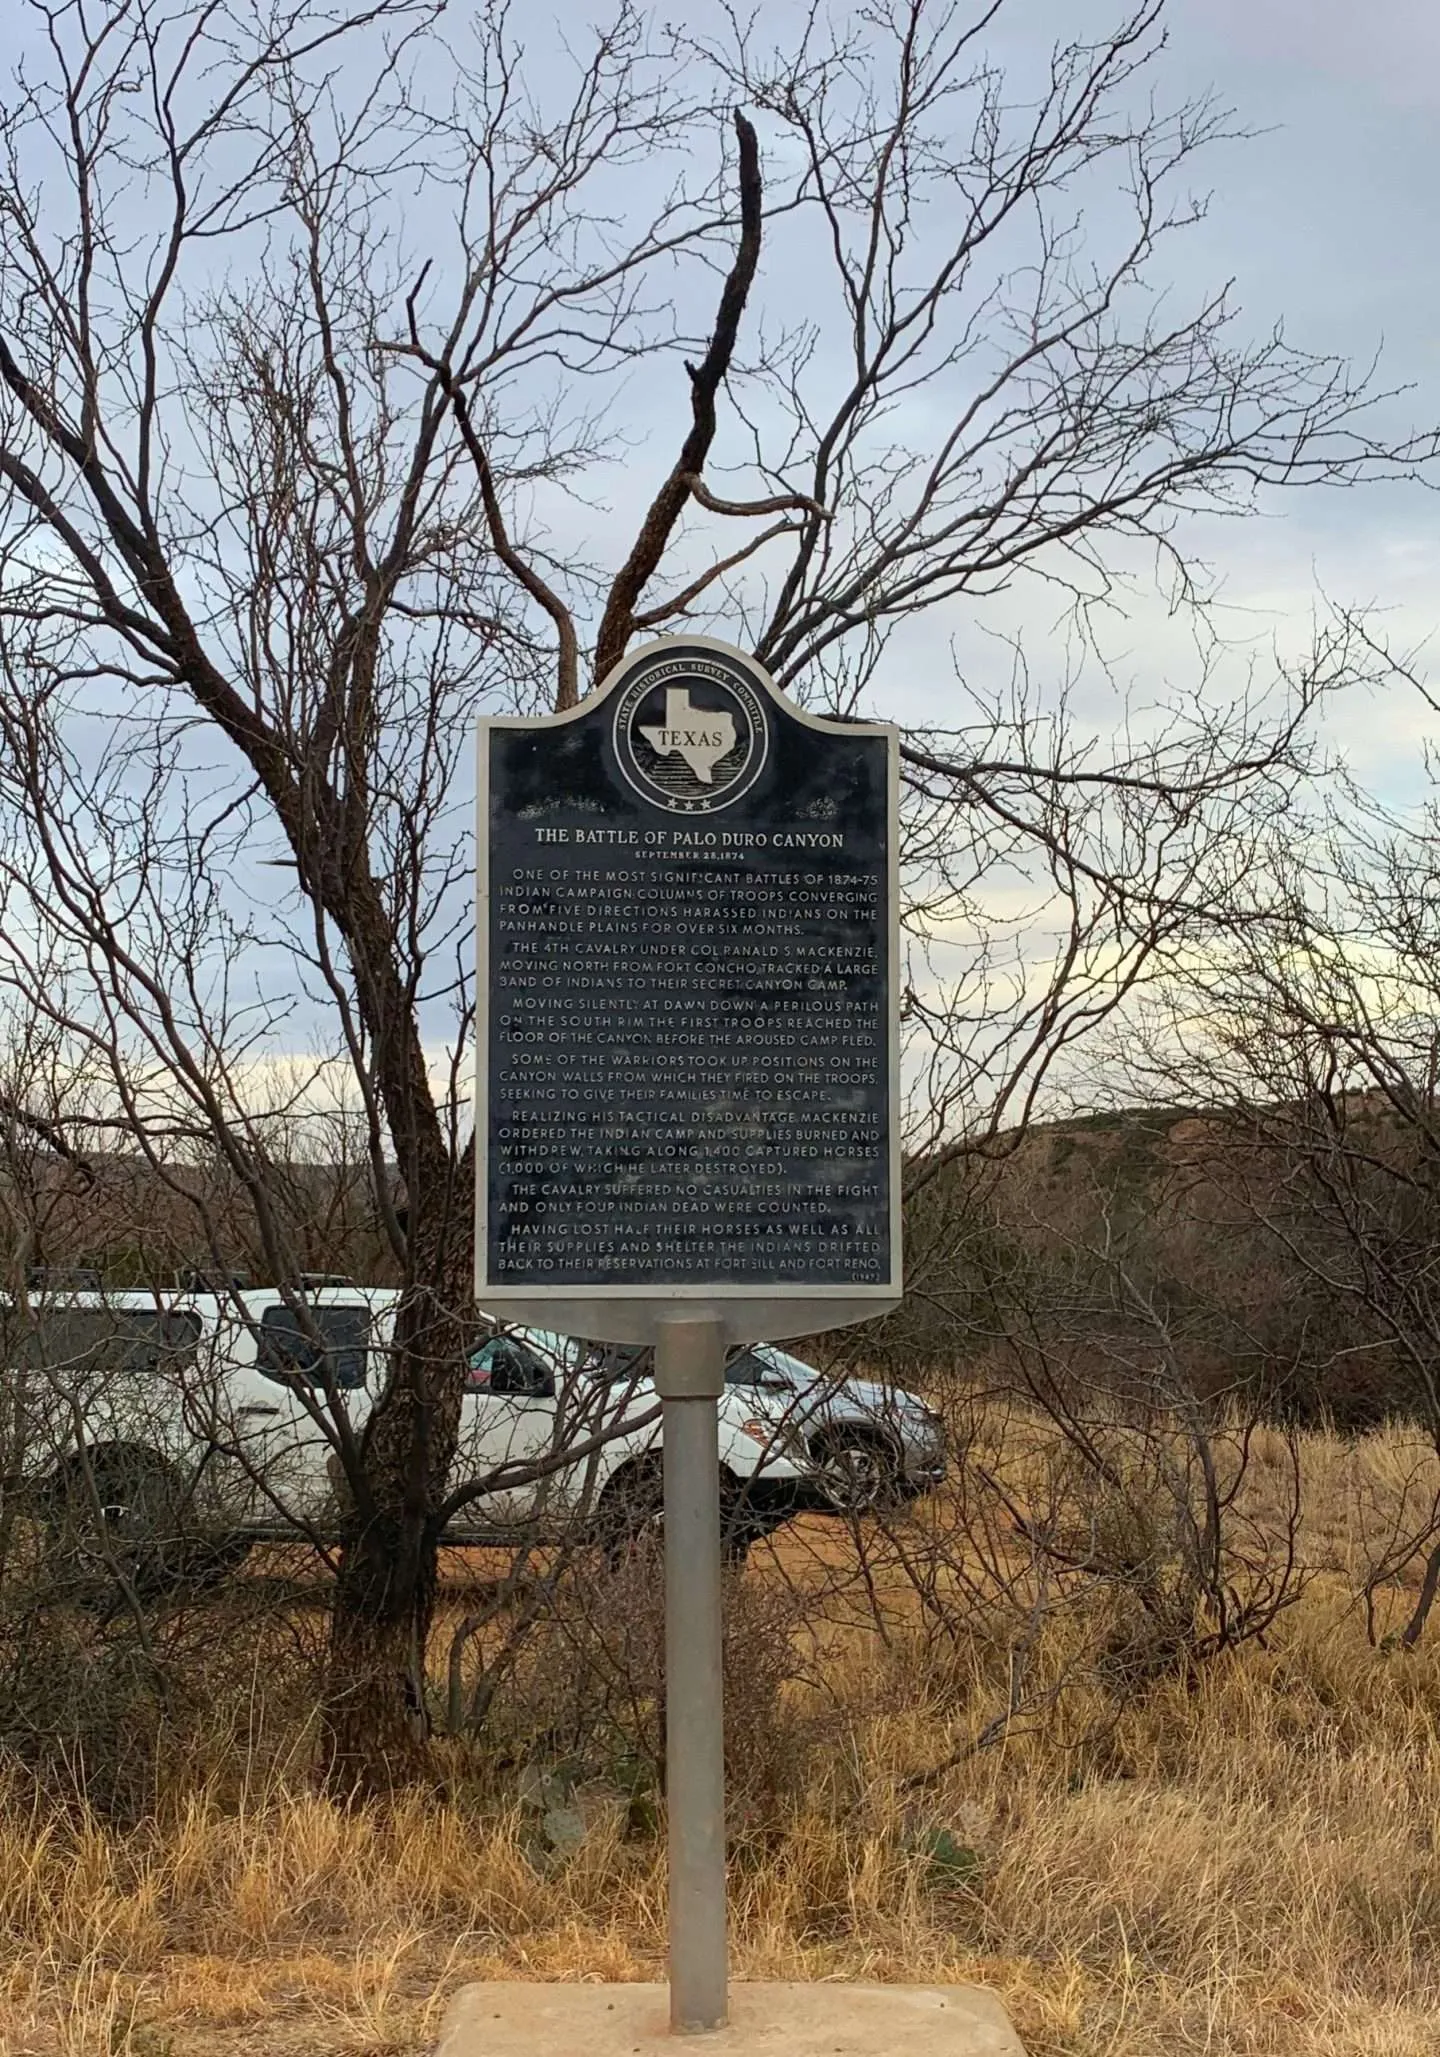 Historical marker commemorating the Battle of Palo Duro in the State Park.